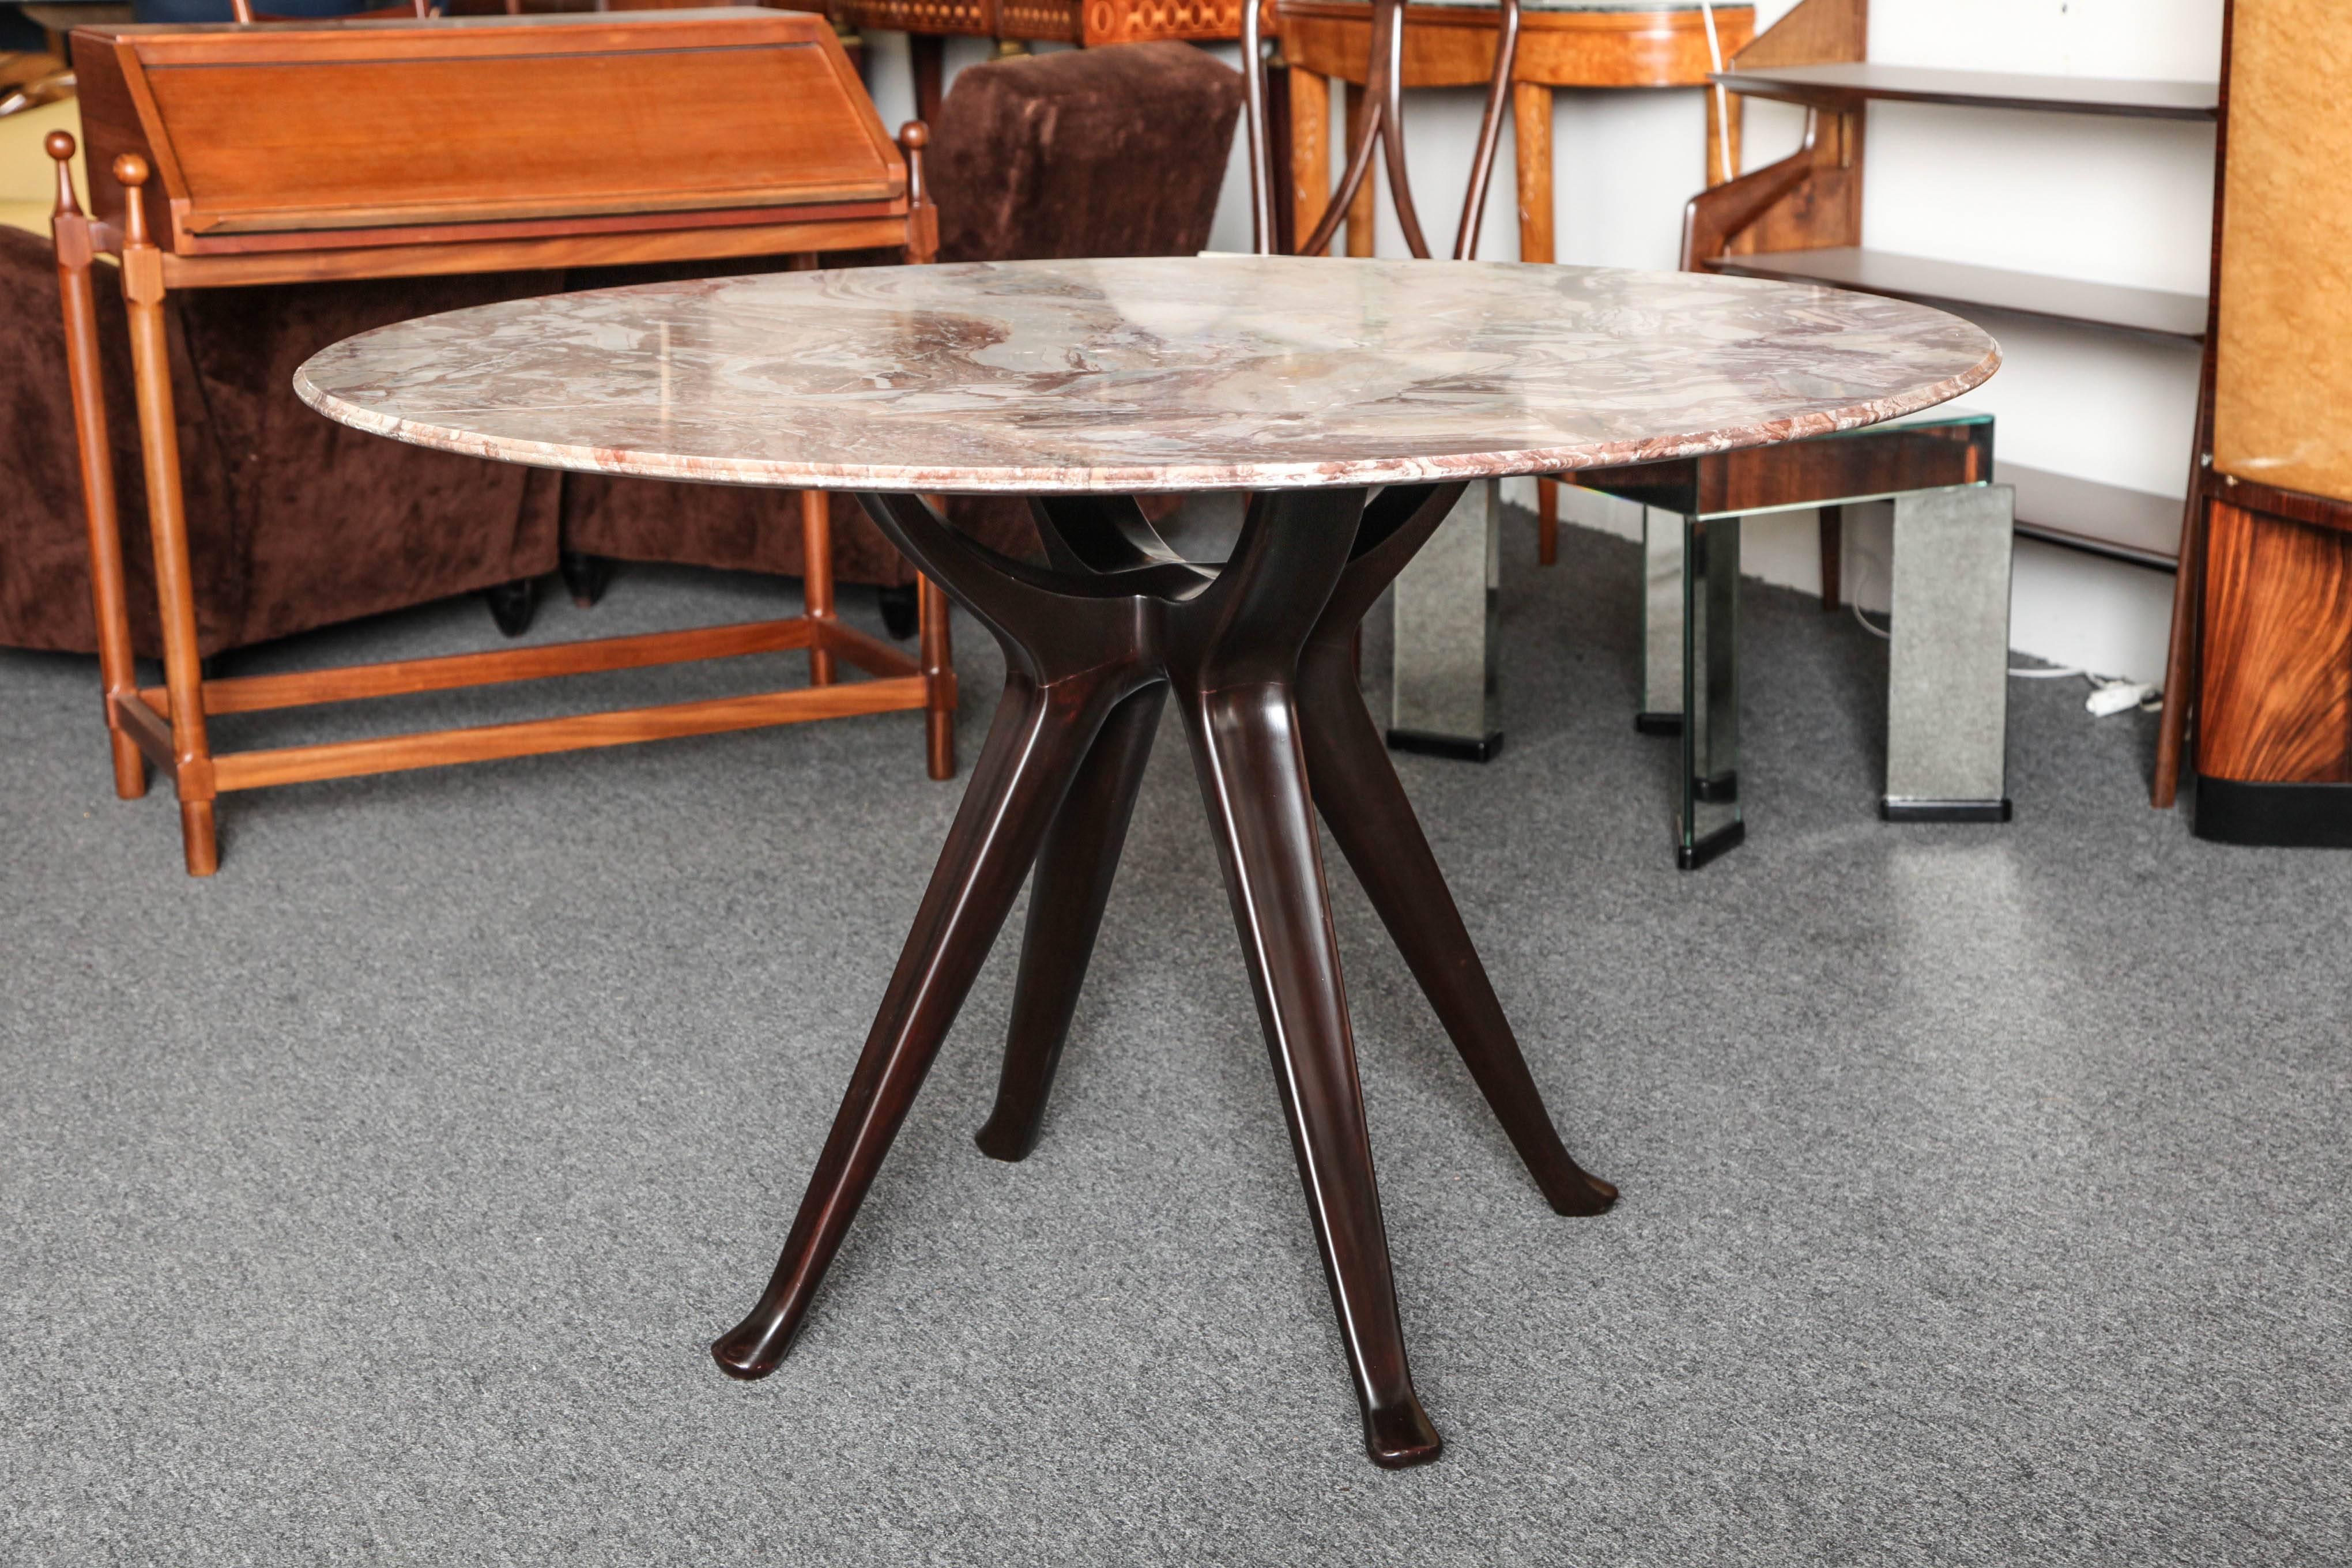 Stylish Osvaldo Borsani T40 dining table made in Milan, 1954. Carved mahogany base with great detailing on the legs, a top in beautifully grained marble. Table has two clip on leaves that can sit up to ten people, when opened 89" long x